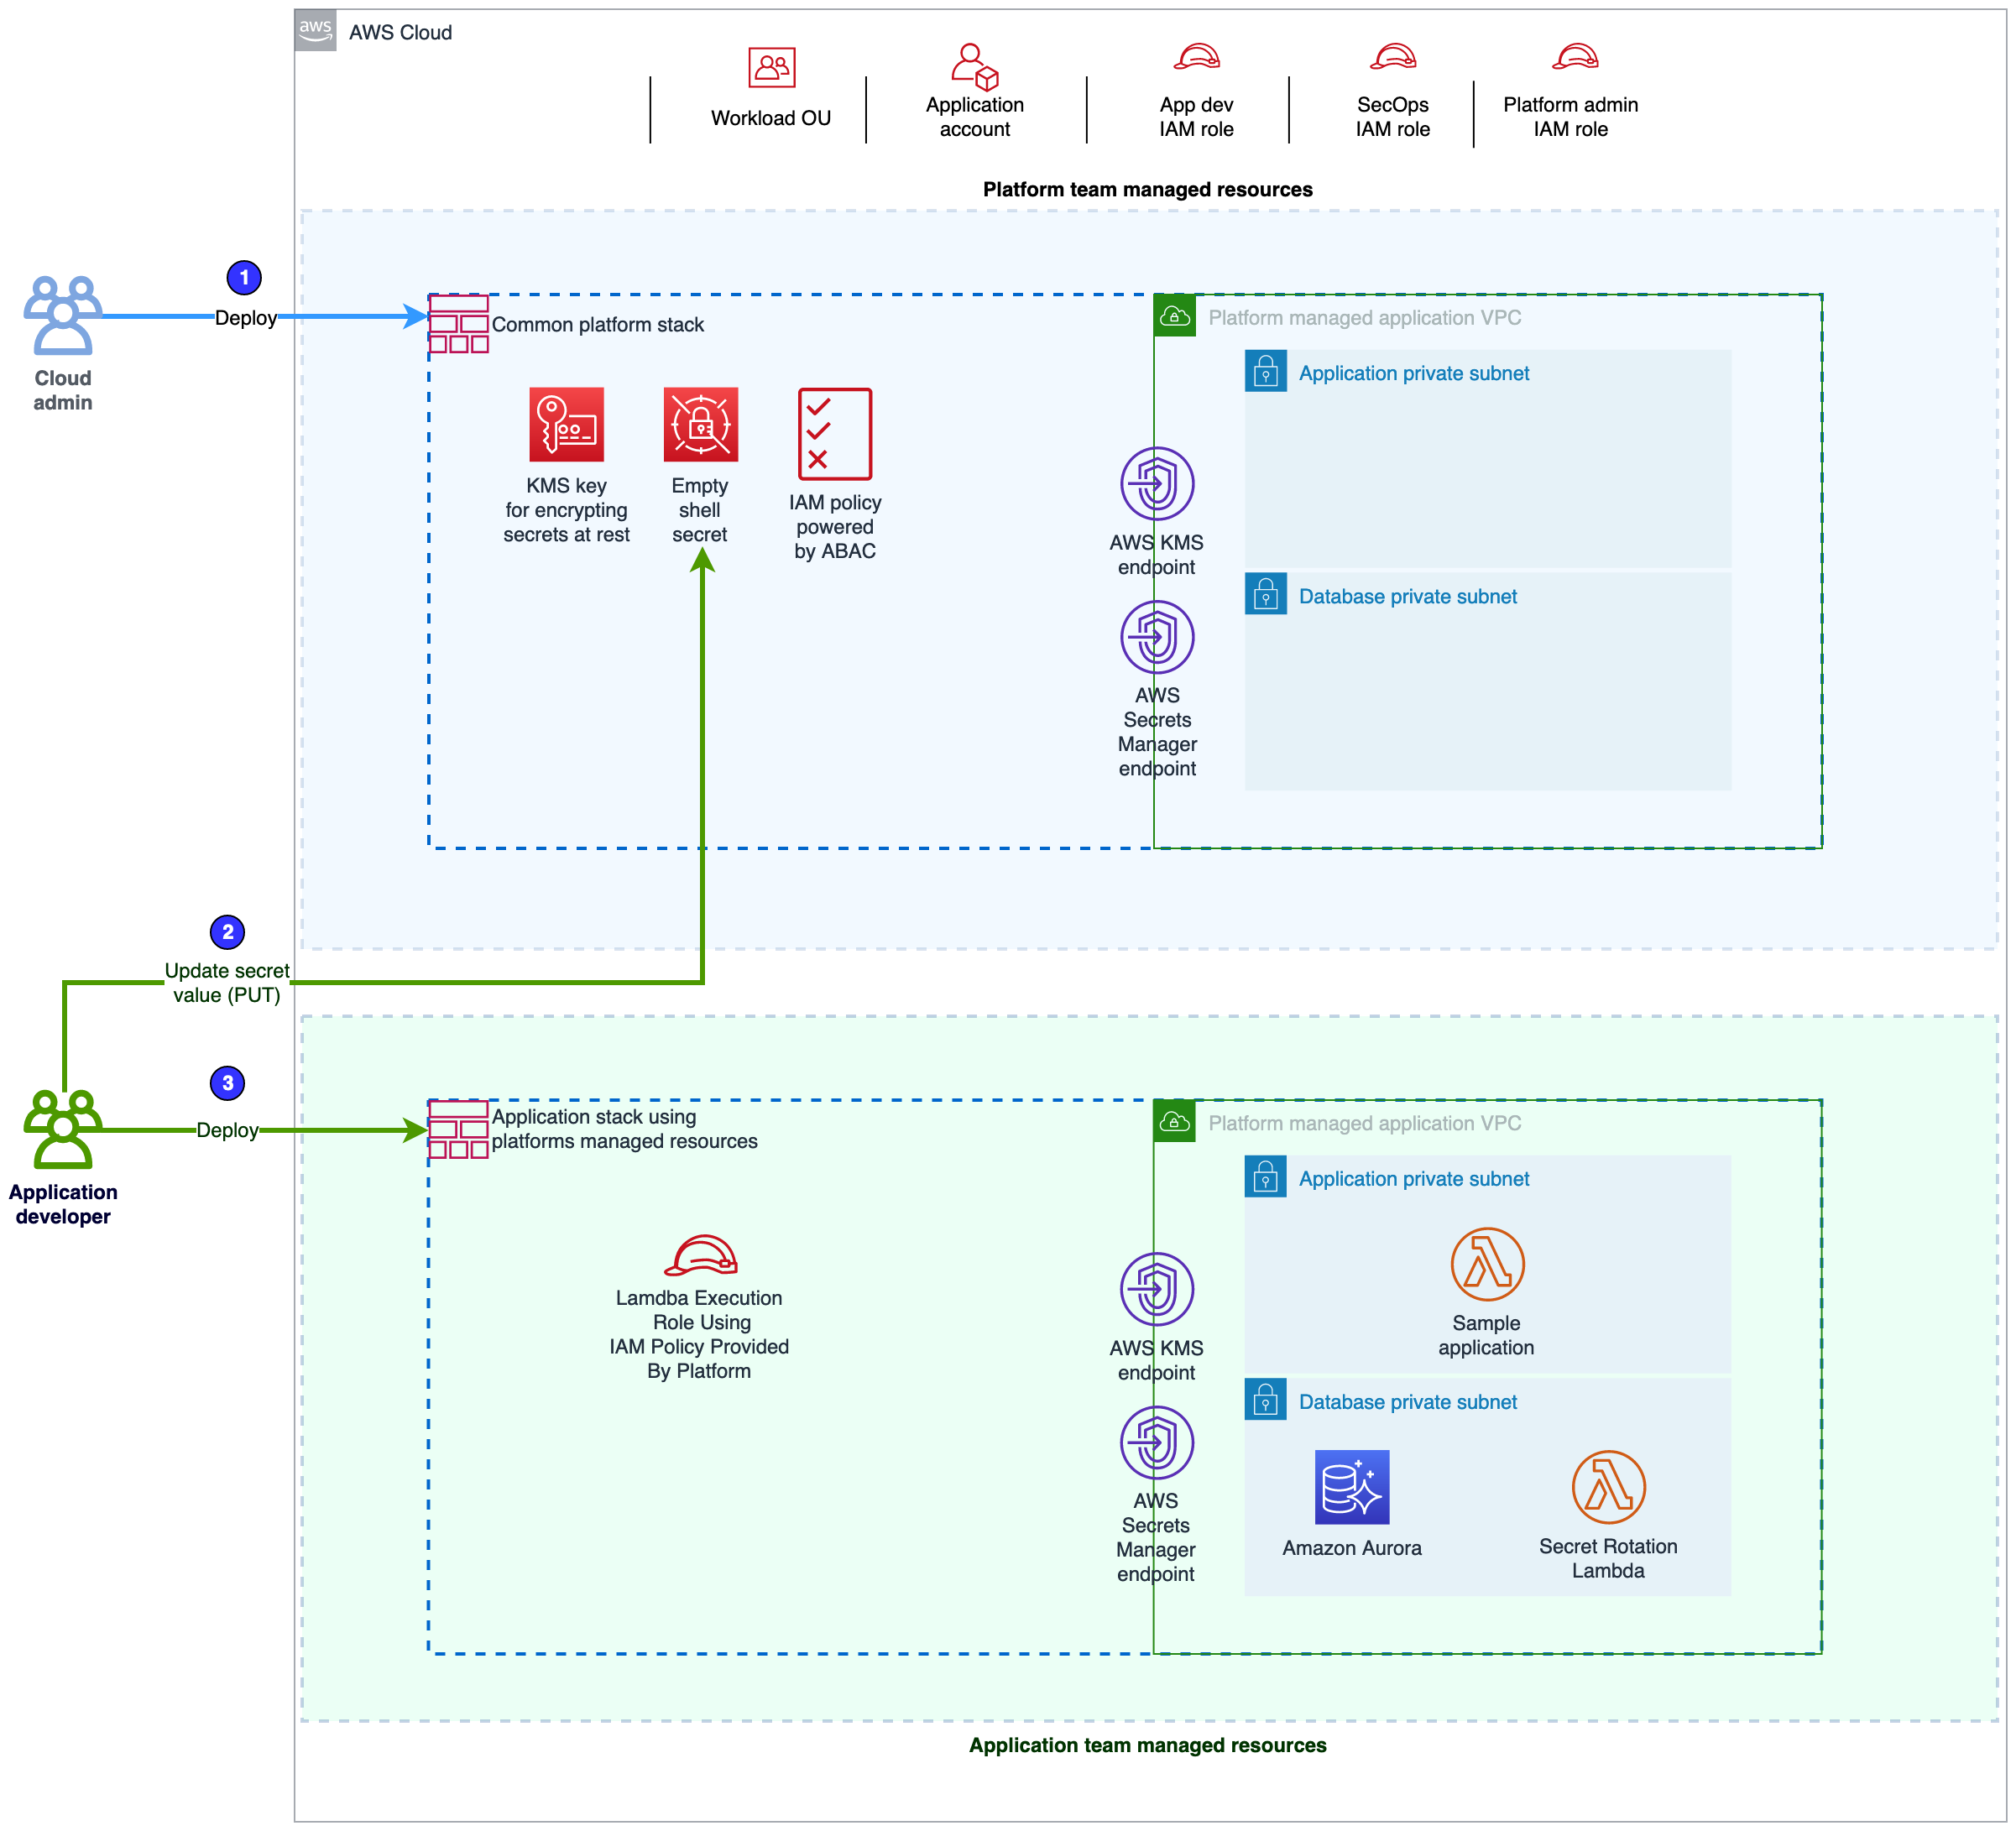 asm-migrate-personas-architecture-on-aws.png